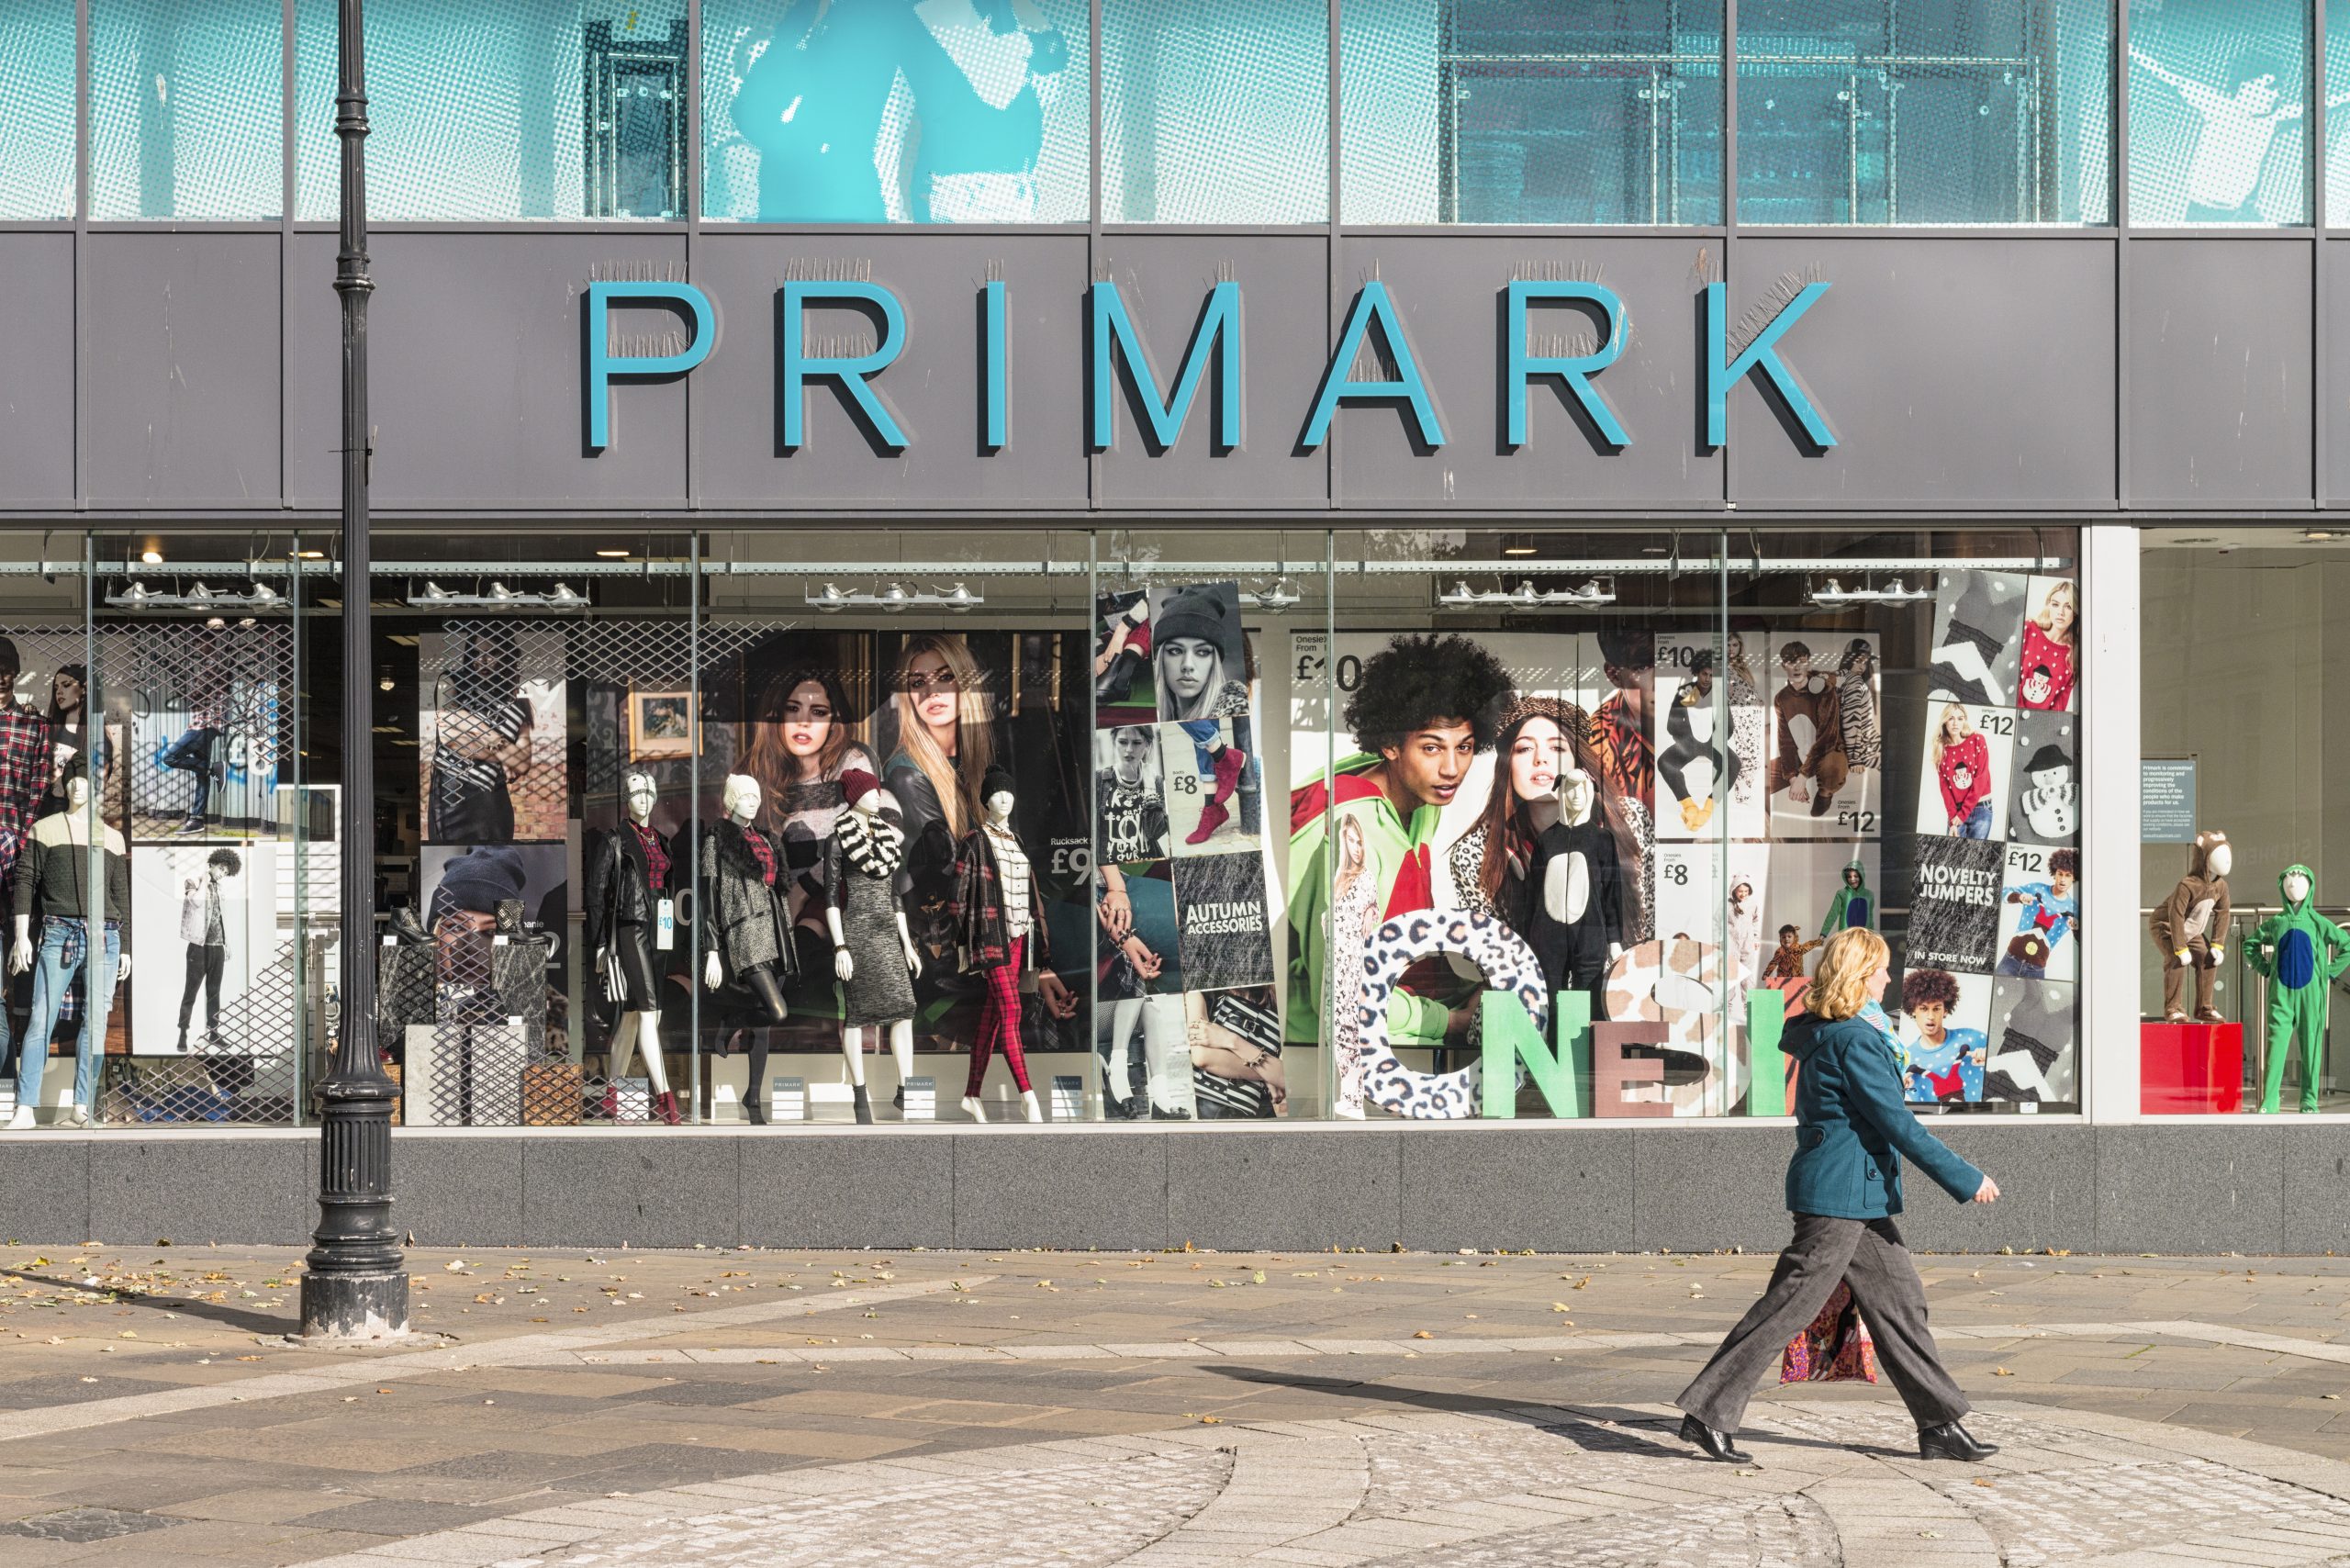 ‘It’s summer’s must-have dress’: Primark worker reveals the £12 frock ‘everyone needs’ that flatters all shapes